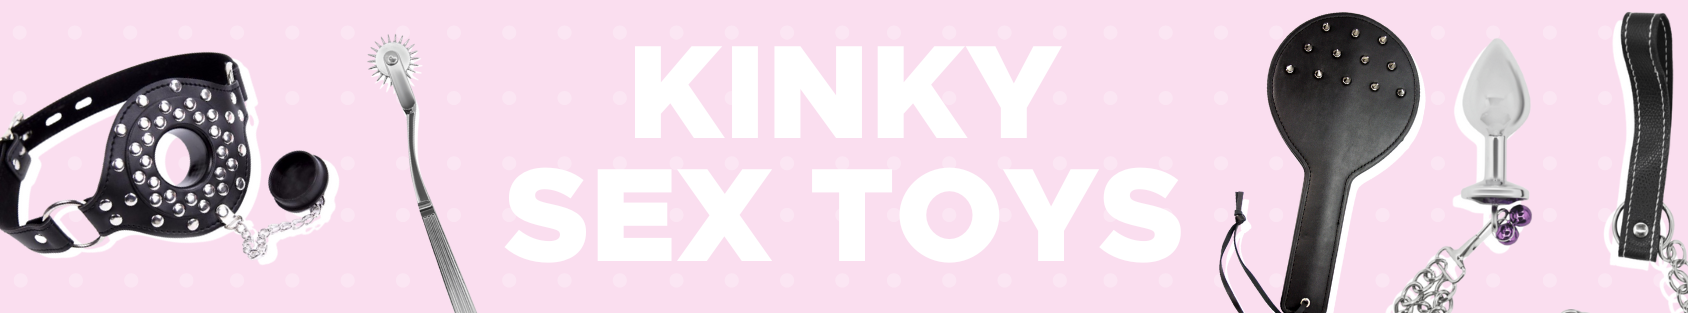 Banner for our kinky sex toys collection. Banner reads: Kinky Sex Toys. Shop our selection of kinky sex toys and bondage. 100% discreet shipping. 